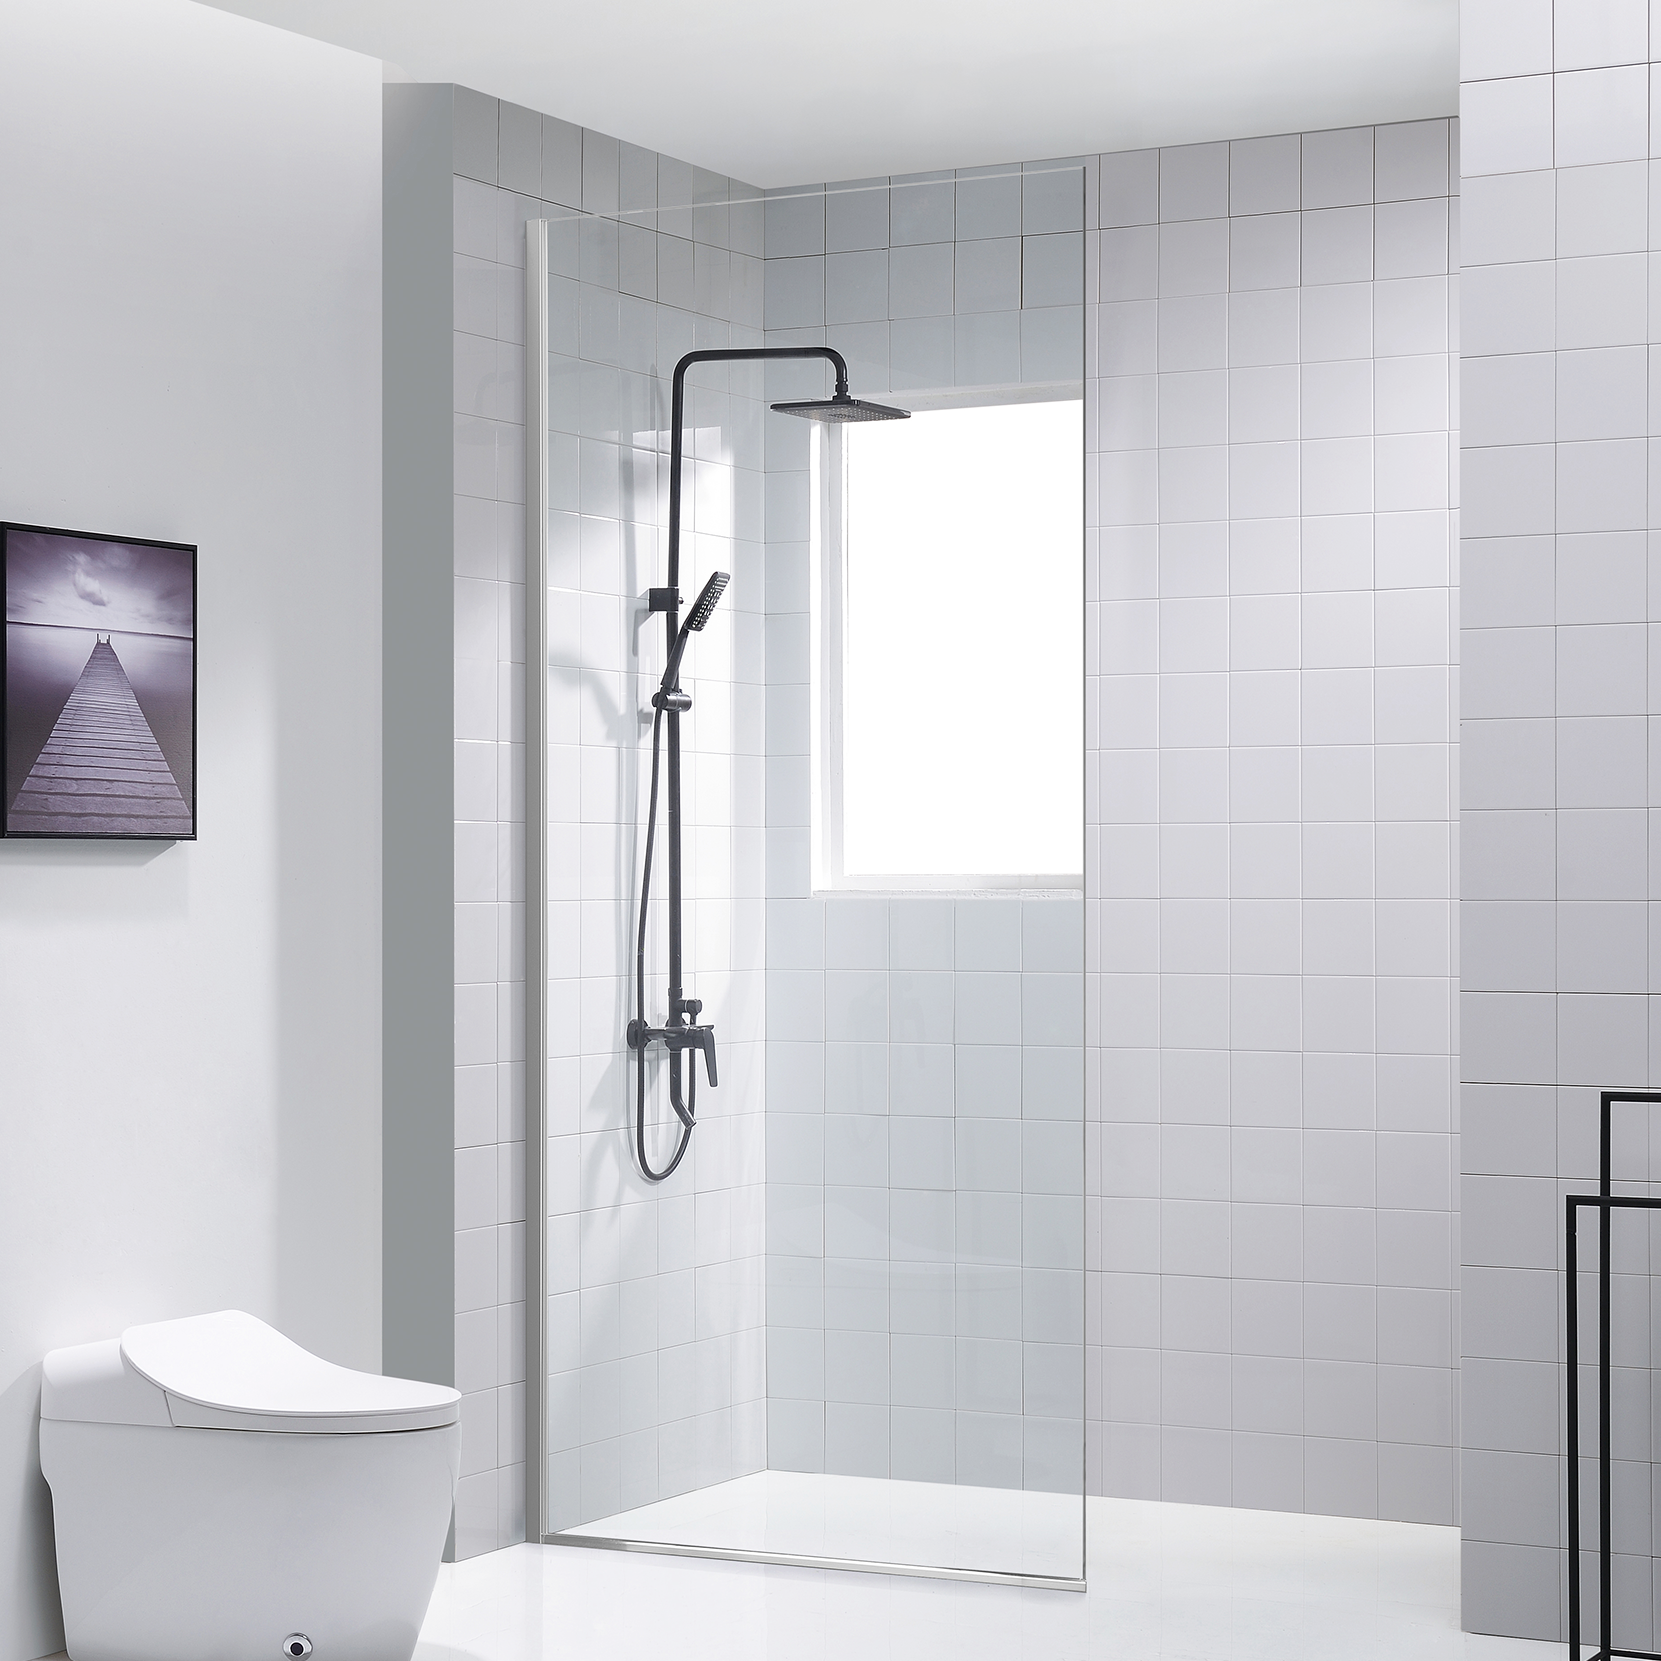 Dreamwerks 32"W x 79"H Frameless Fixed Shower Door in Chrome - Available in Clear or Frosted Glass - Dreamwerks